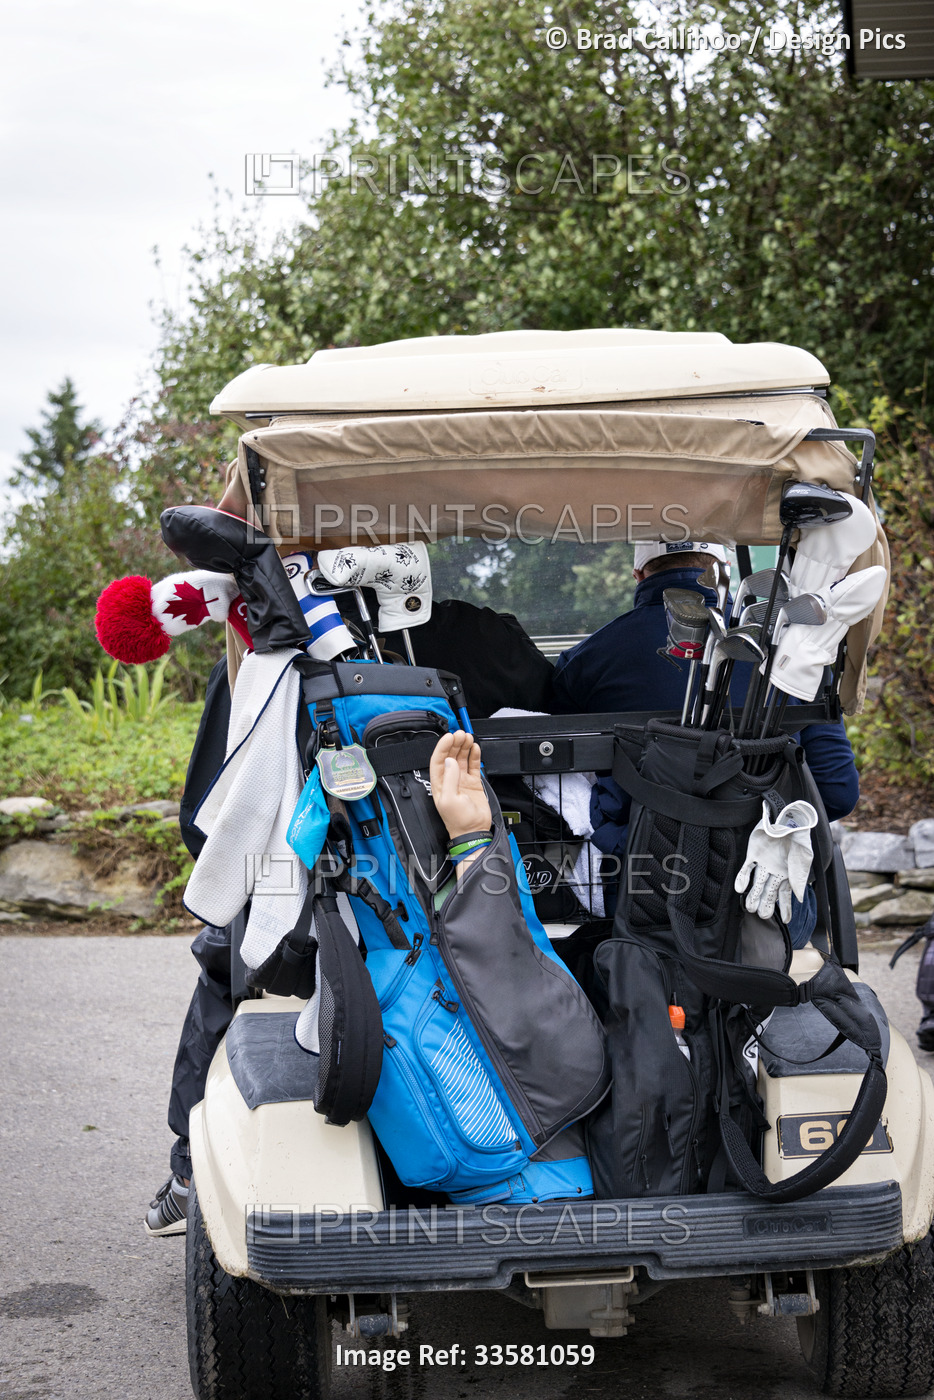 Golf cart with arm prothesis in the back; Okotoks, Alberta, Canada